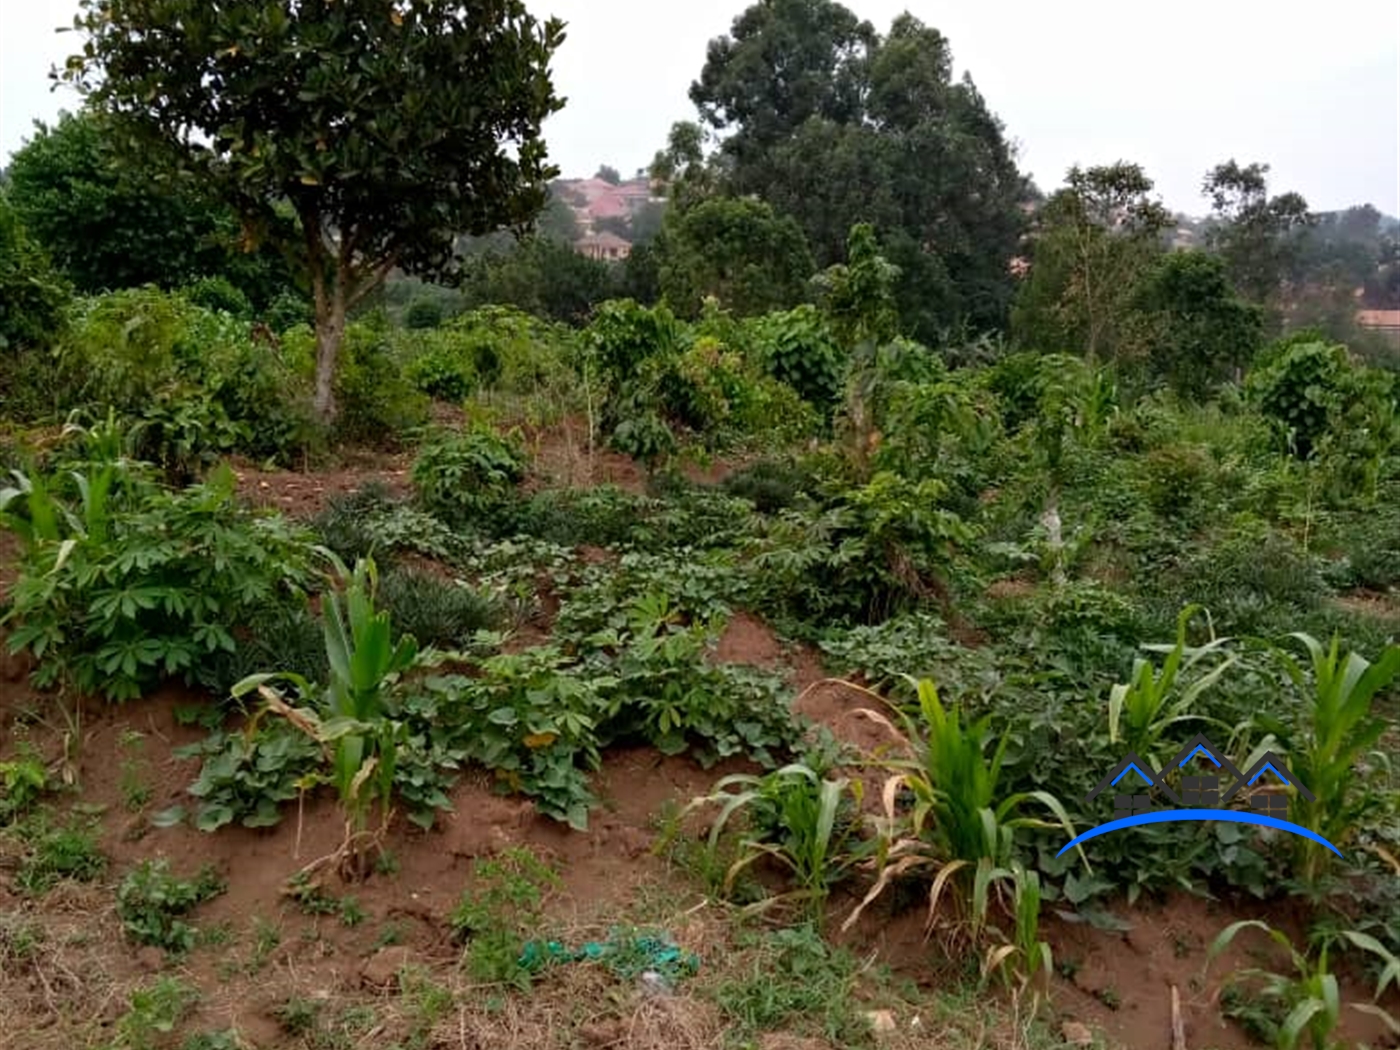 Residential Land for sale in Wakisotowncenter Wakiso